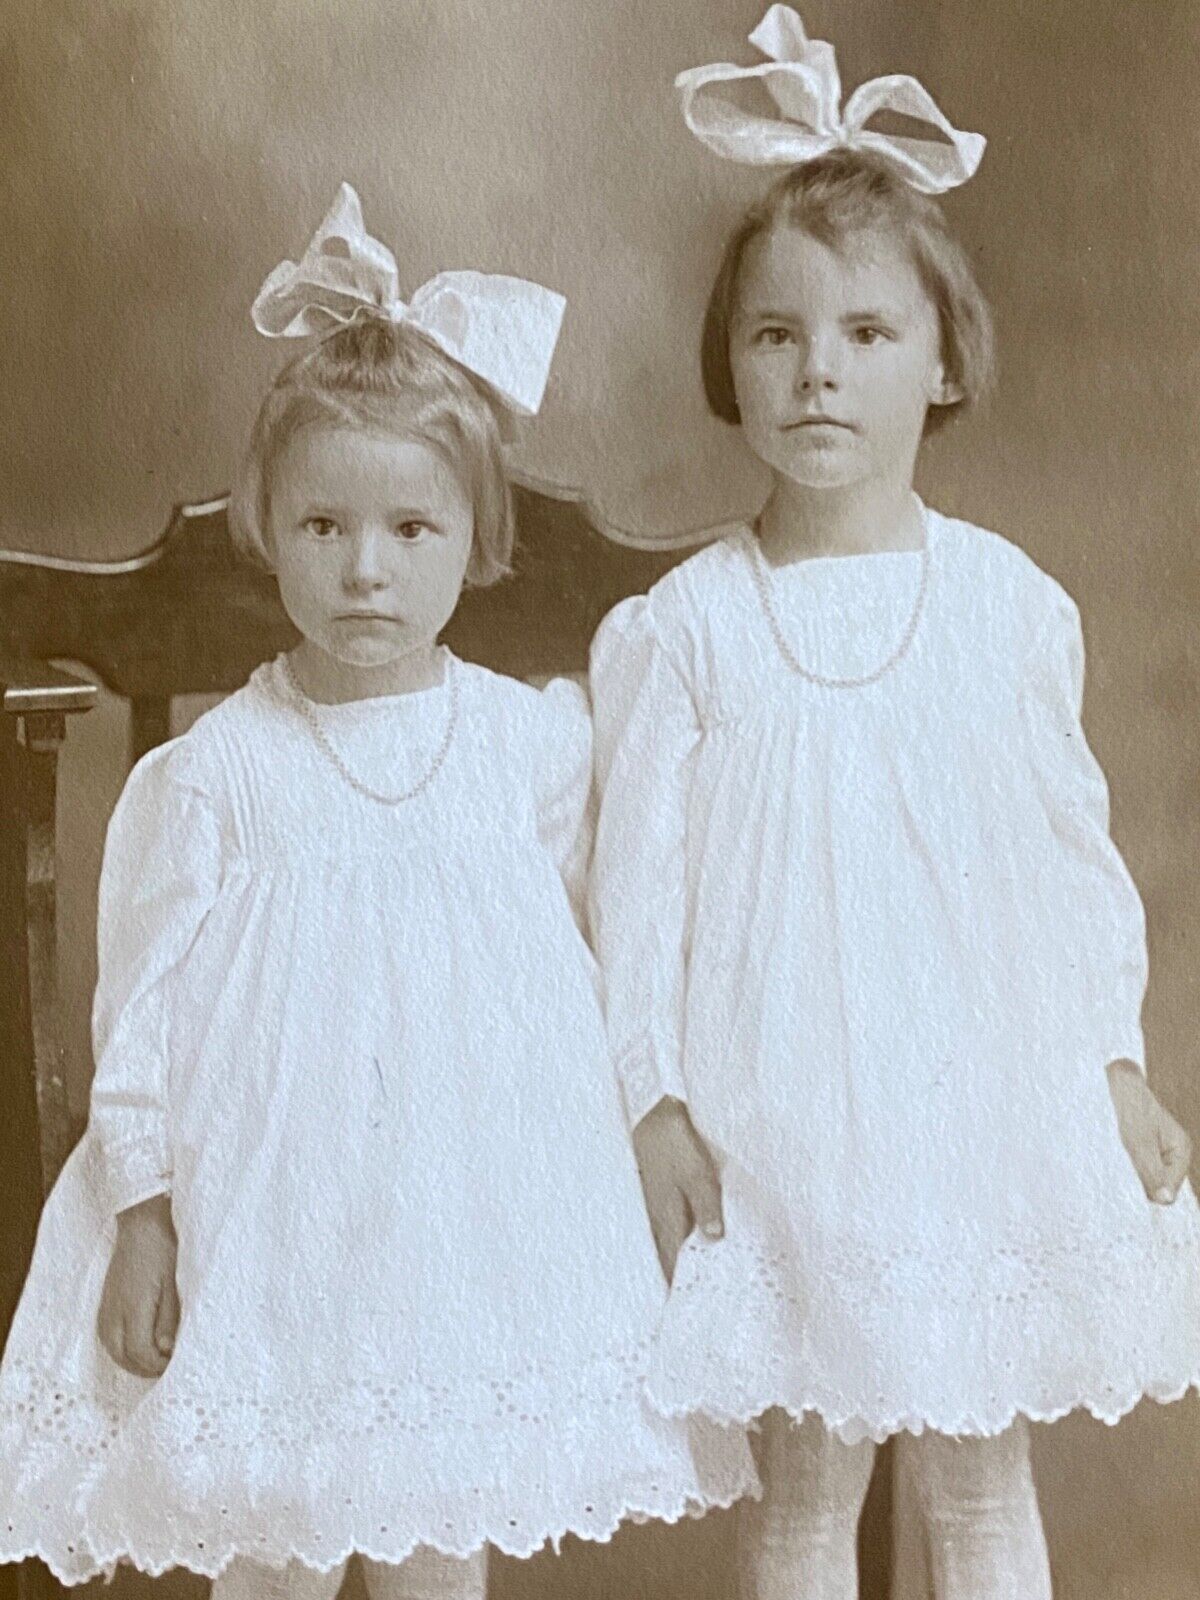 1911 RPPC - TWO SISTERS antique real photo postcard MARGUERITE and LUCILE cute